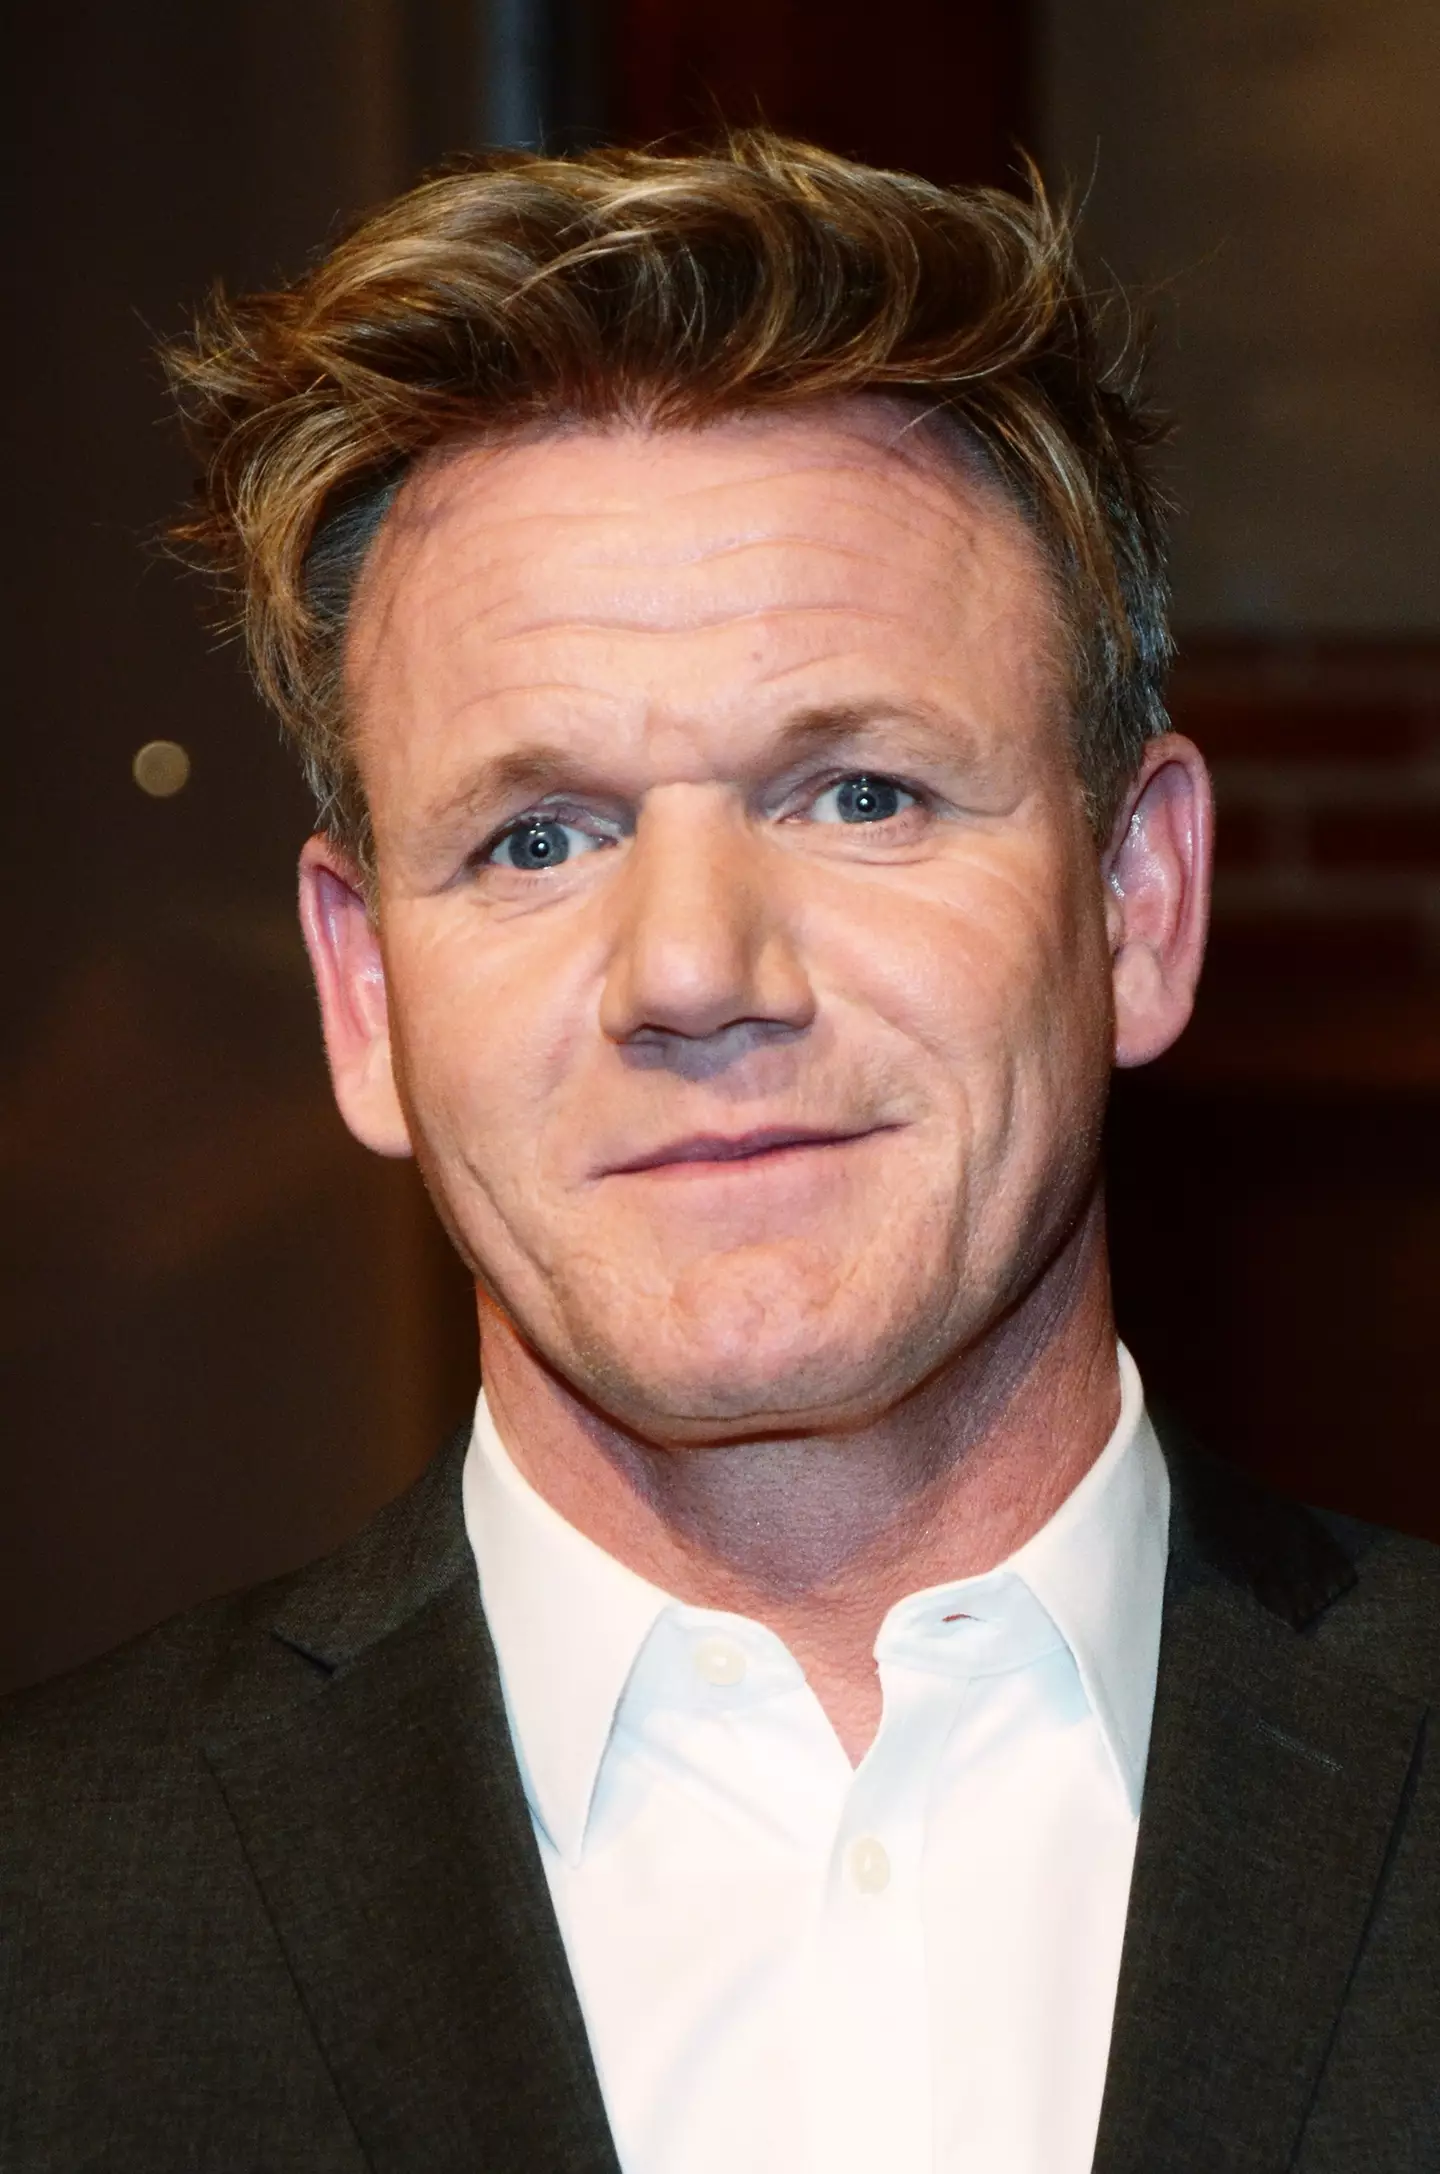 Gordon Ramsay has revealed the one place he won't eat.